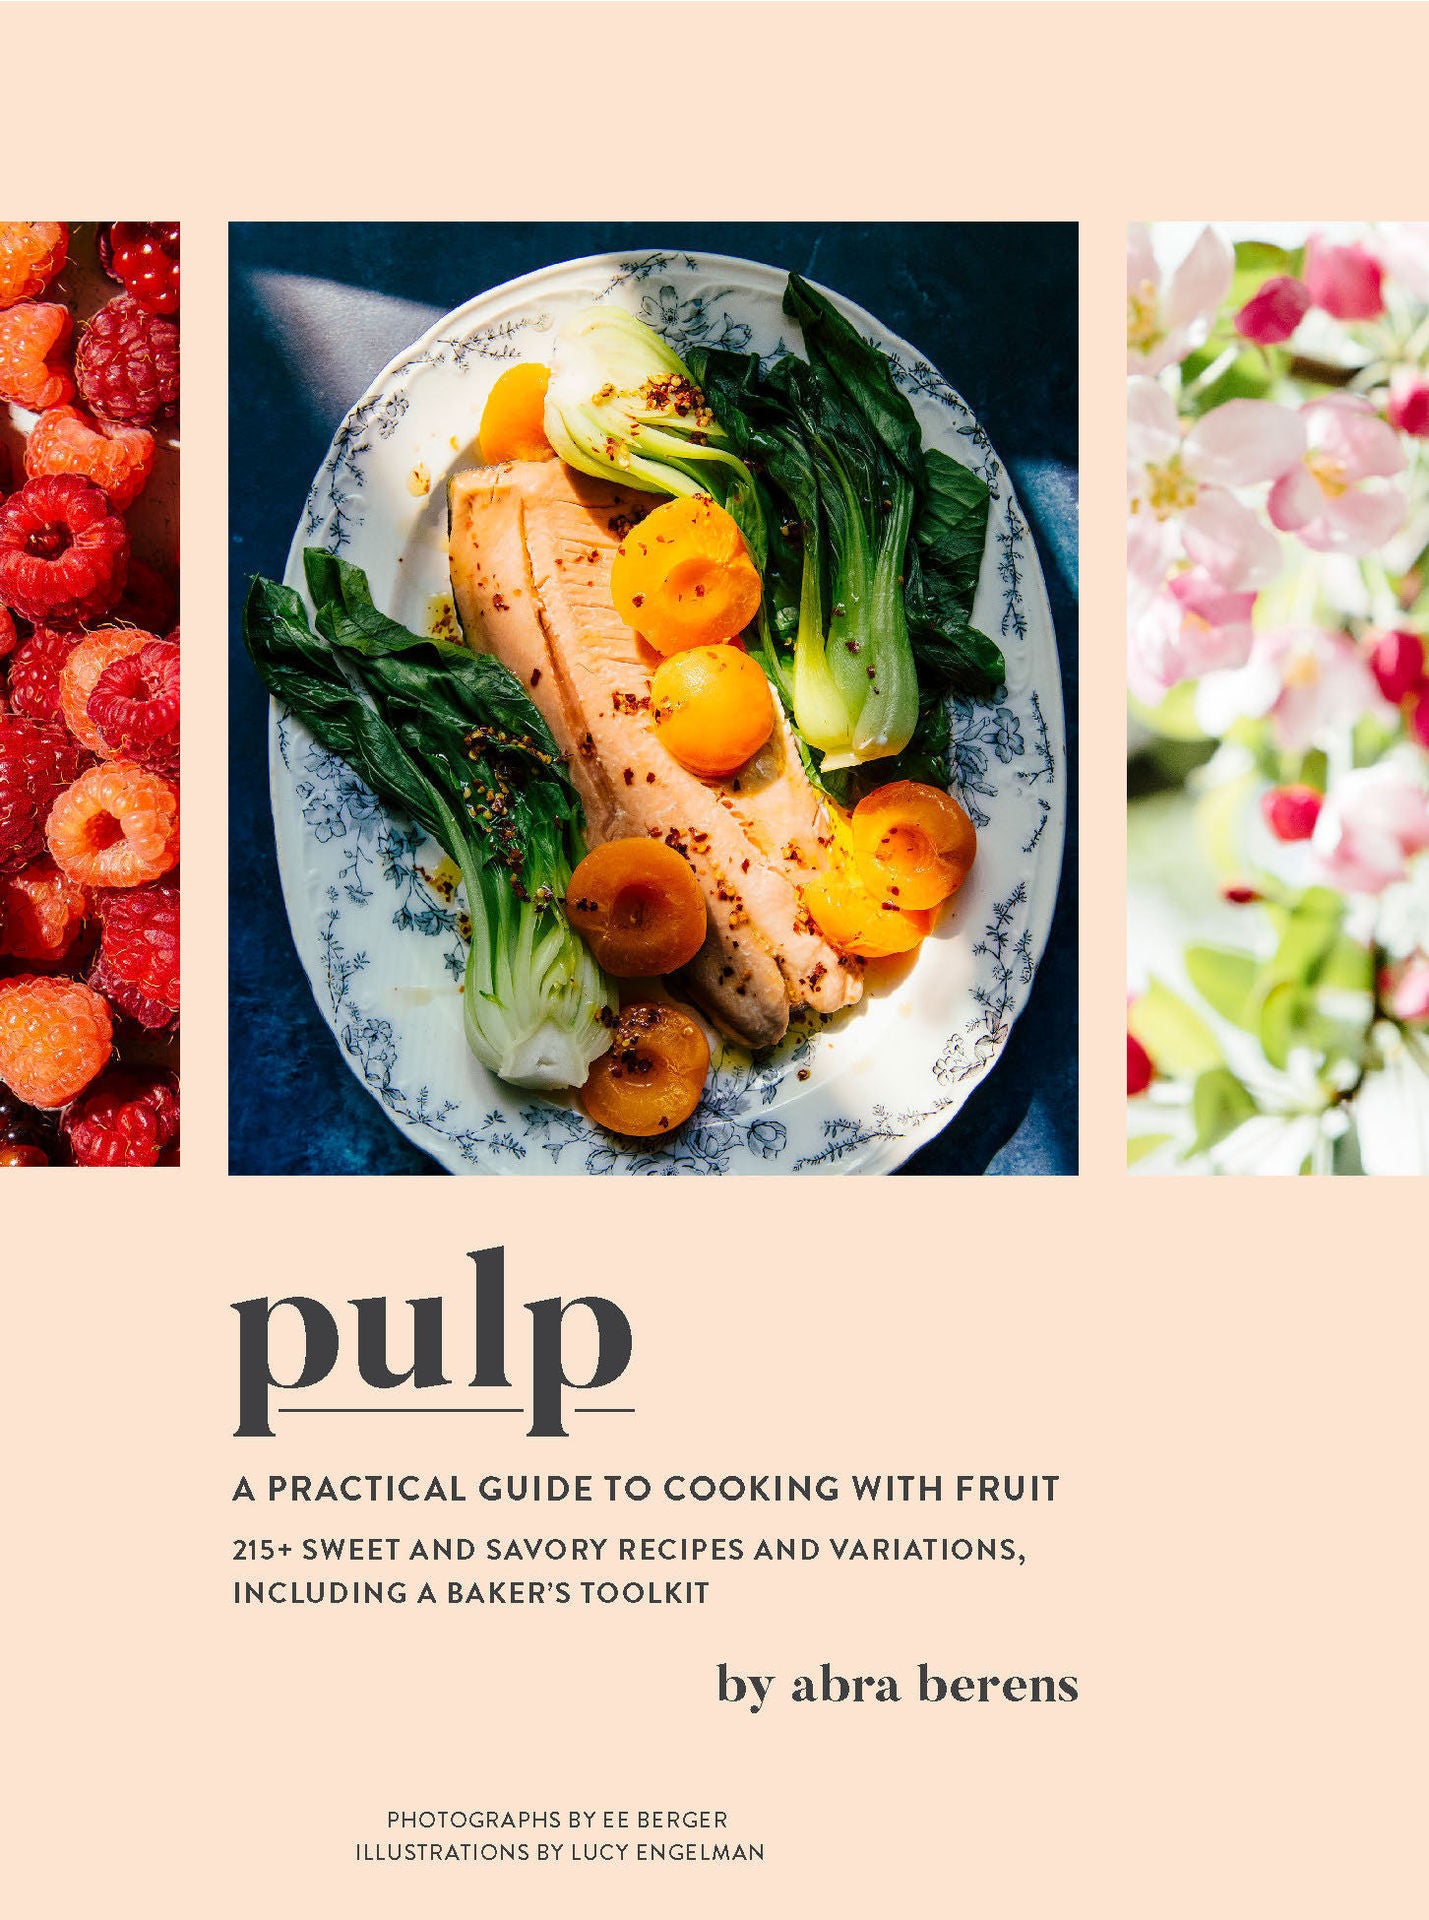 Pulp: A Practical Guide to Cooking with Fruit by Abra Berens